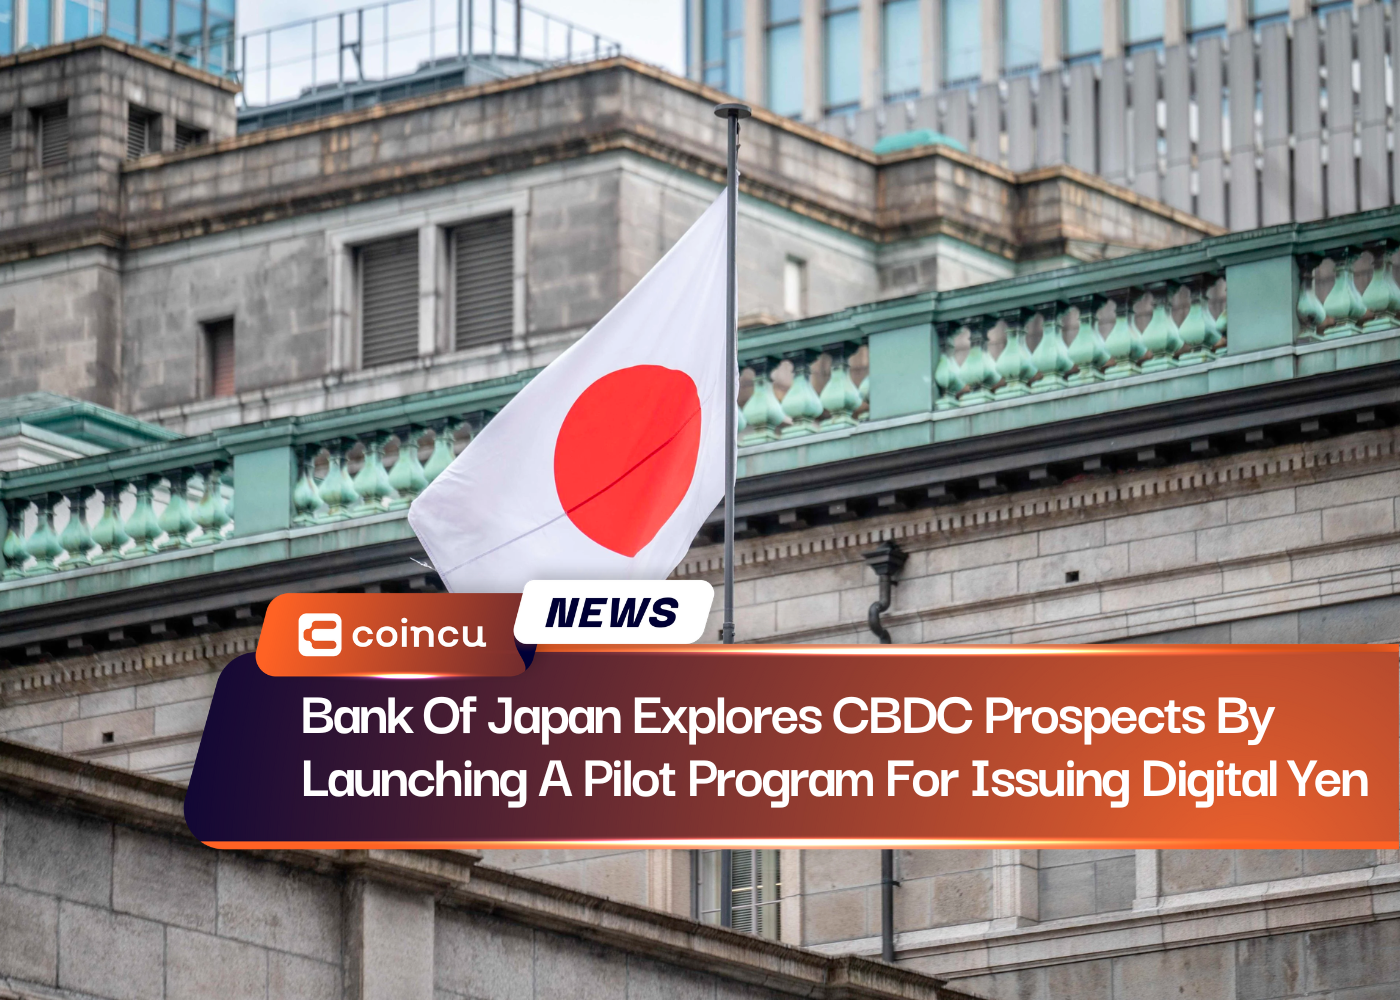 Bank Of Japan Explores CBDC Prospects By Launching A Pilot Program For Issuing Digital Yen